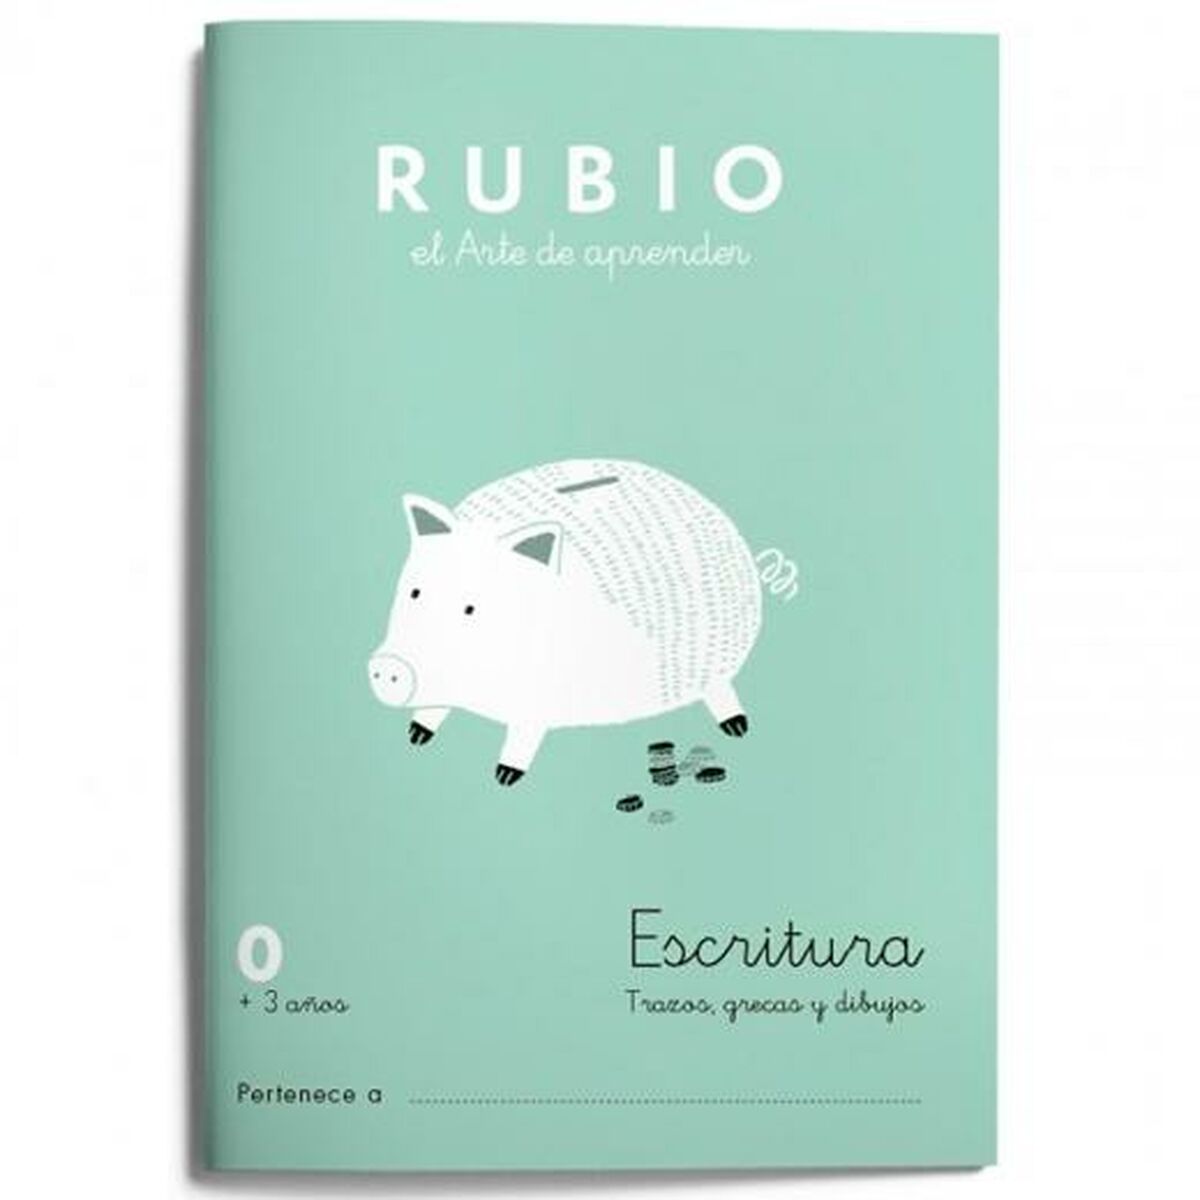 Writing and calligraphy notebook Rubio Nº0 A5 Spanish 20 Sheets (10 Units)